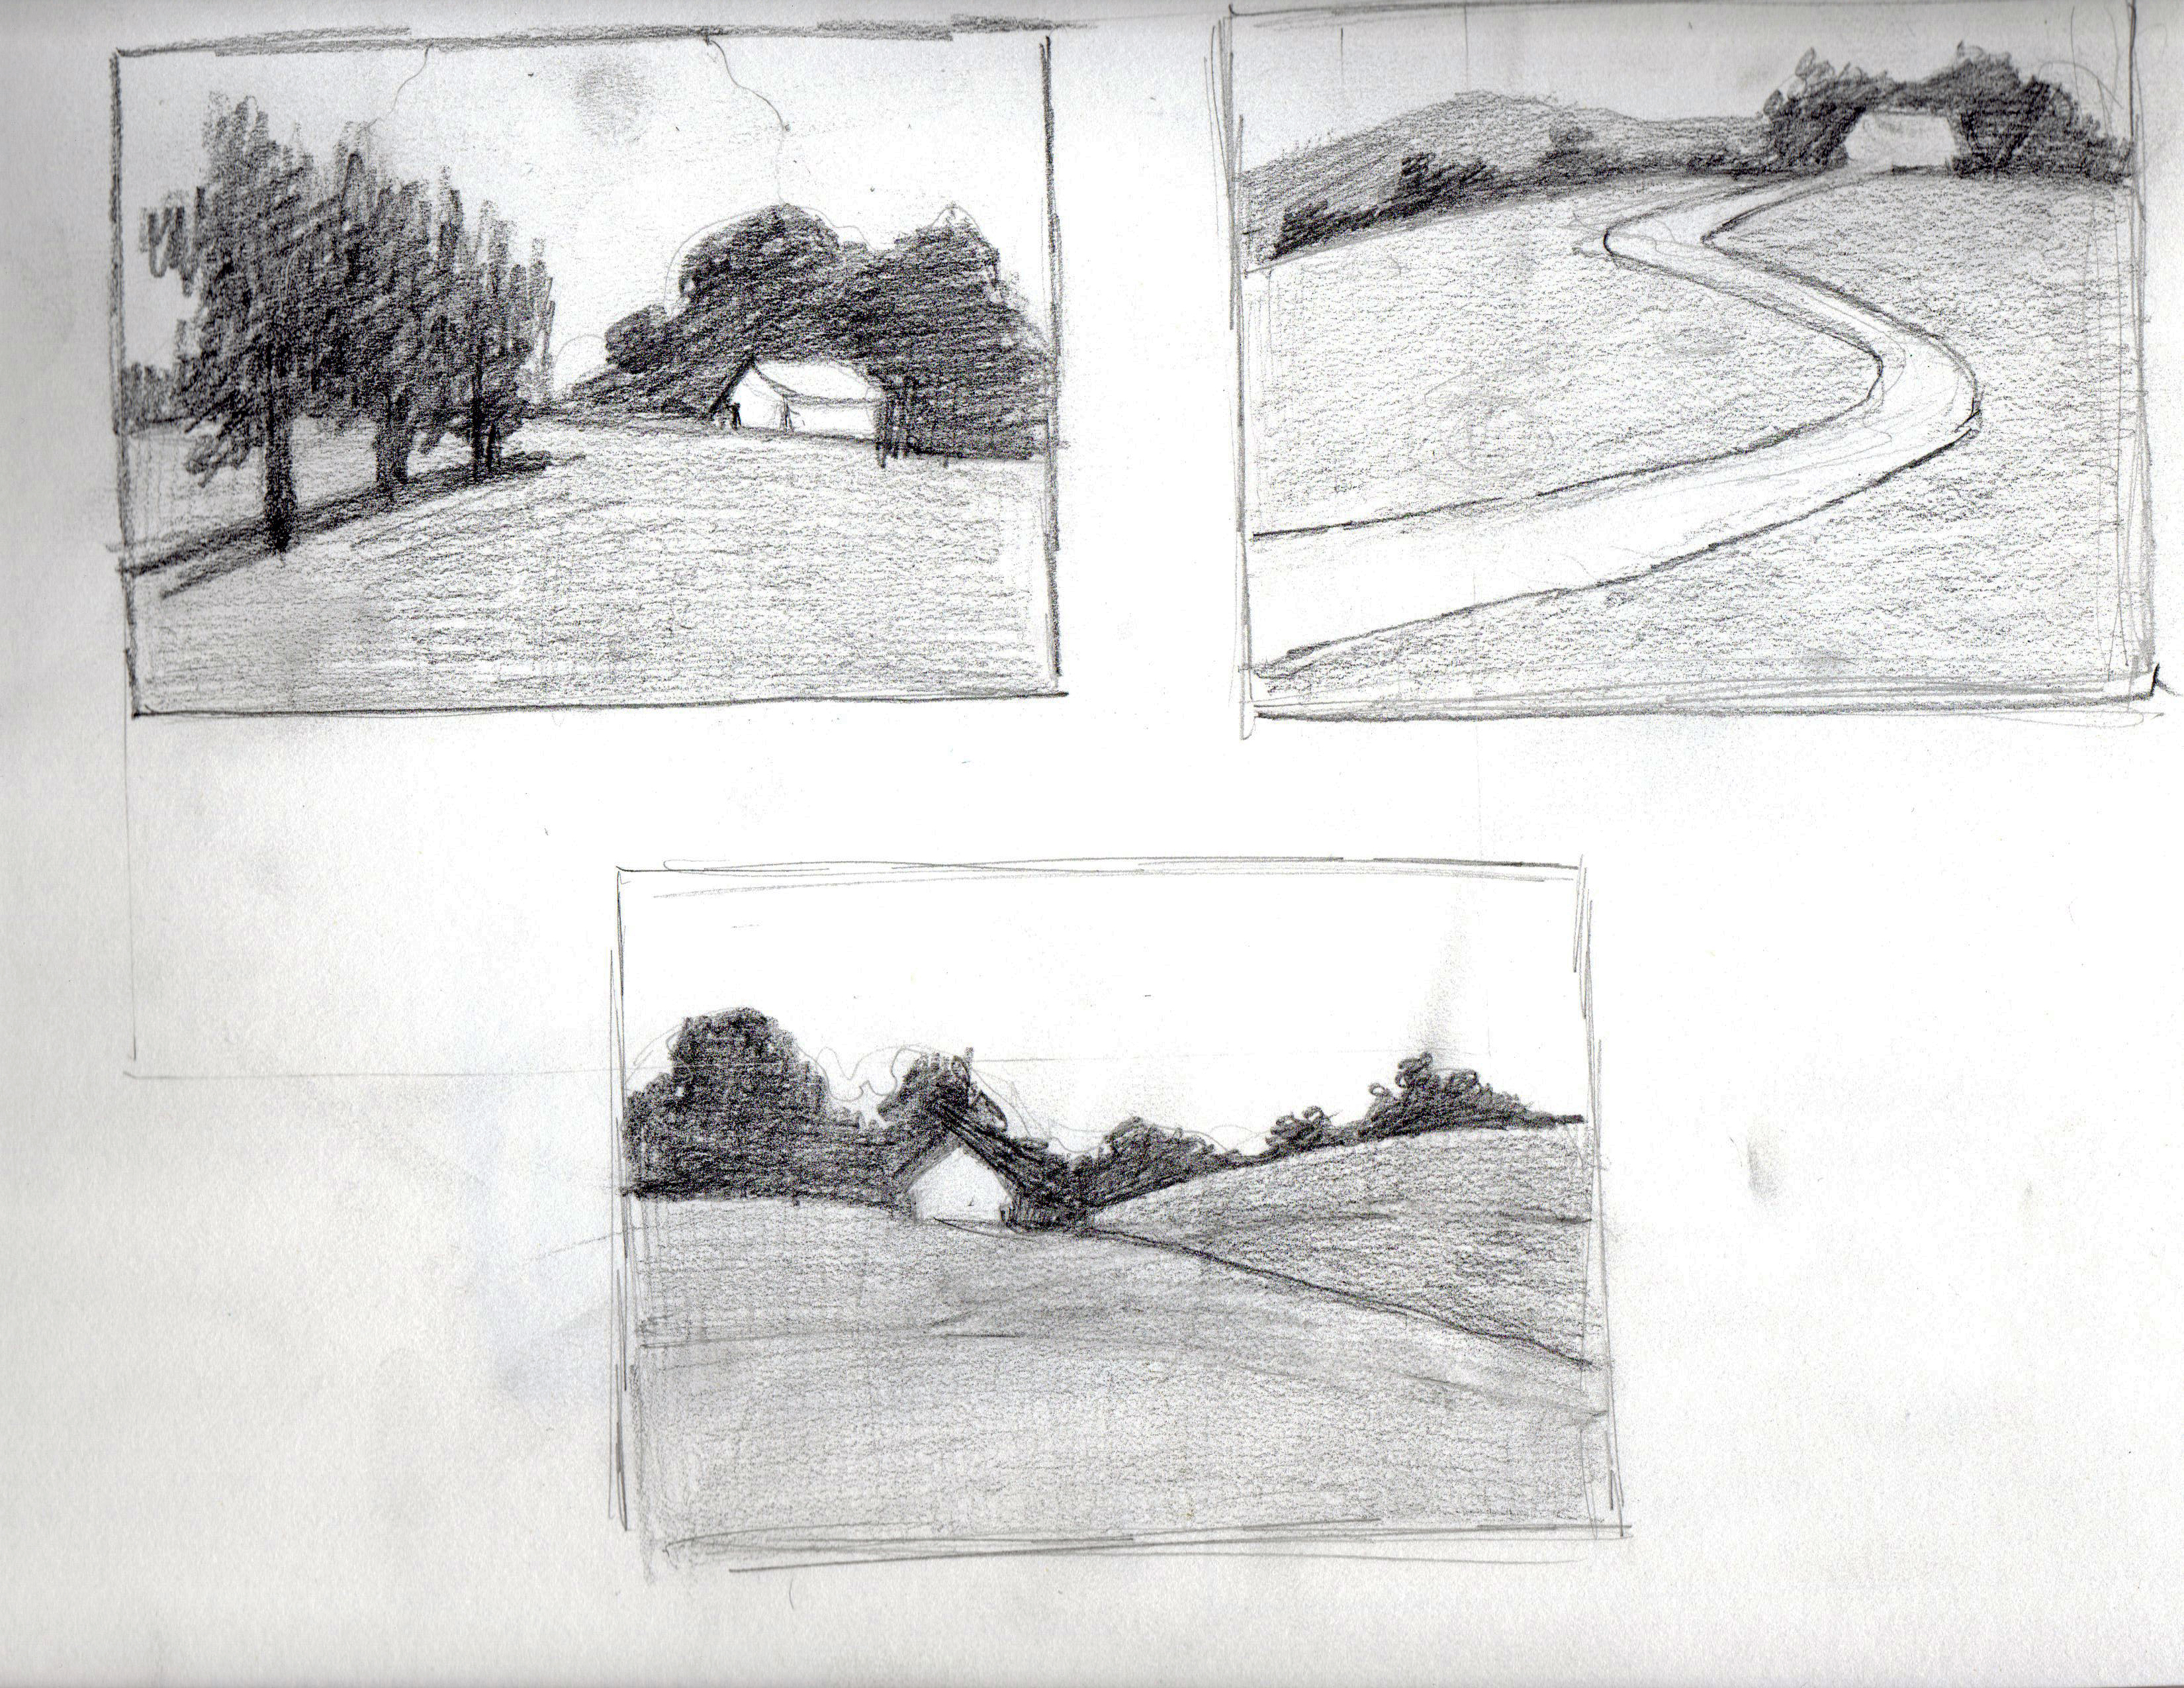 Natural Spaces Wild Places Landscape Art by Warren Peterson Drawing  Inspiration  From Thumbnail Sketch to a Landscape Painting